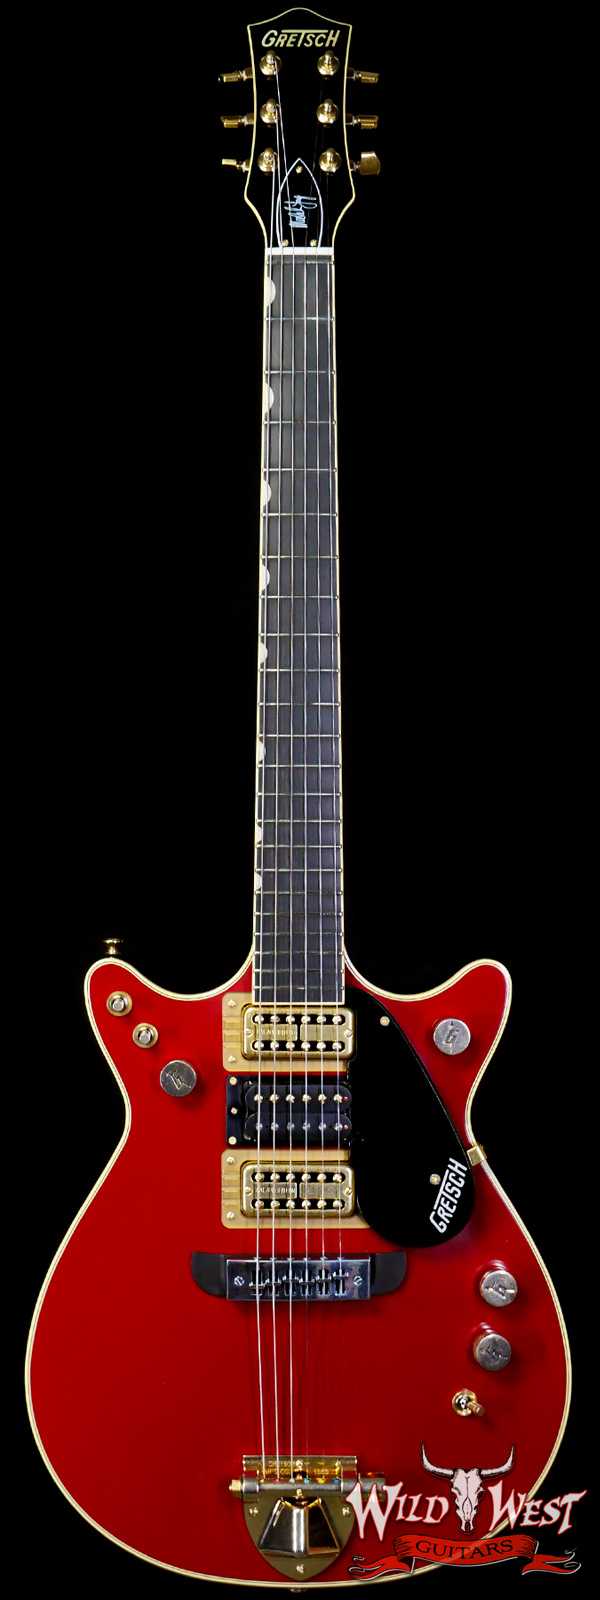 Gretsch G6131-MY-RB Limited Edition Malcolm Young Signature Jet  Ebony Fingerboard Vintage Firebird Red